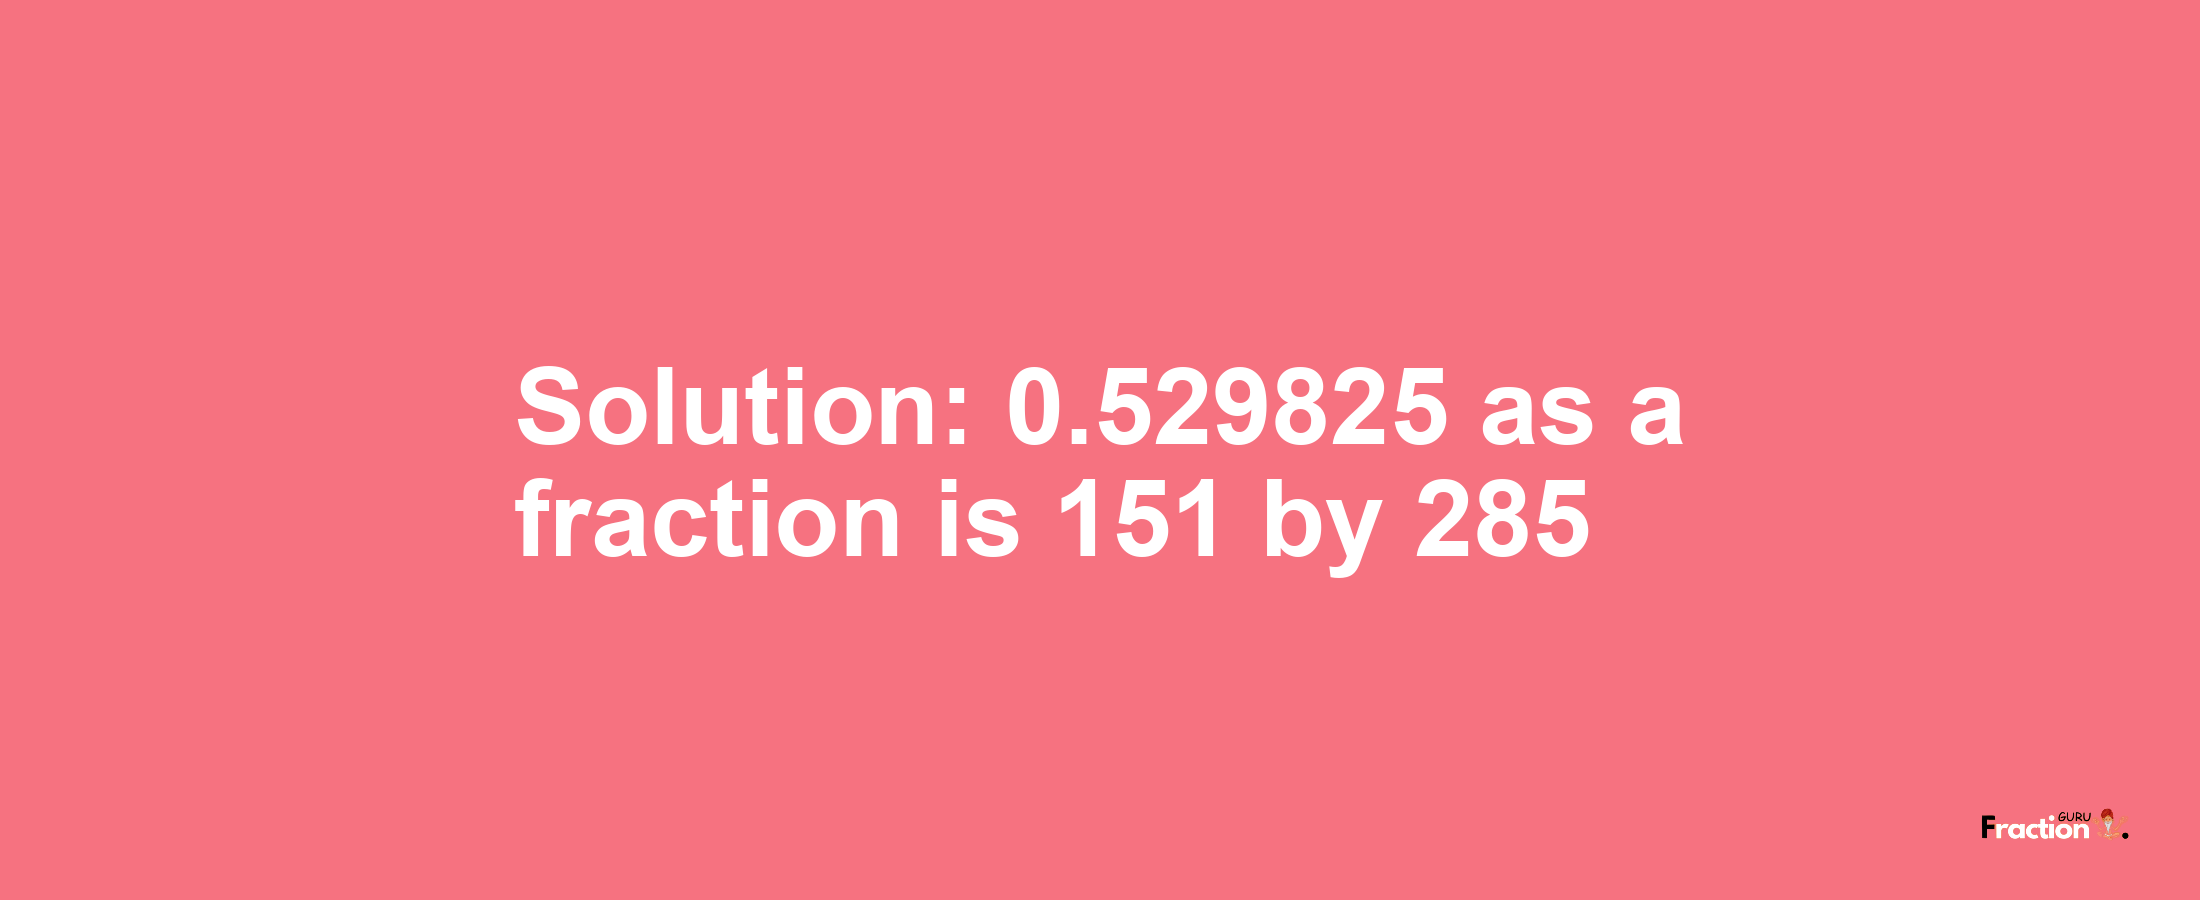 Solution:0.529825 as a fraction is 151/285